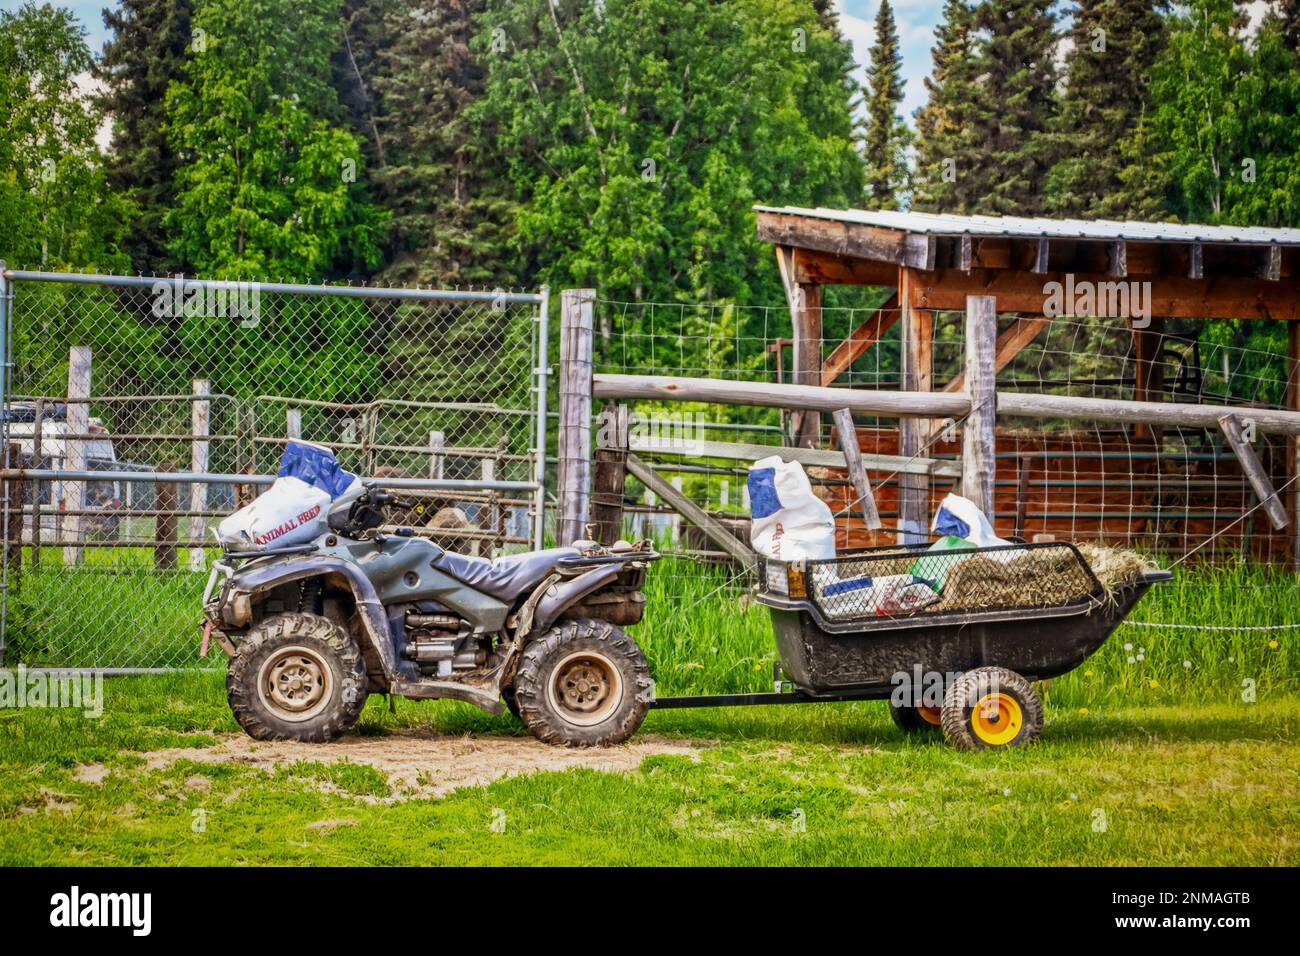 Feeding the animals - Four wheeler ATM pulls small trailer loaded with hay and sacks of feed is parked outside of a fence and animal shed with tall ev Stock Photo